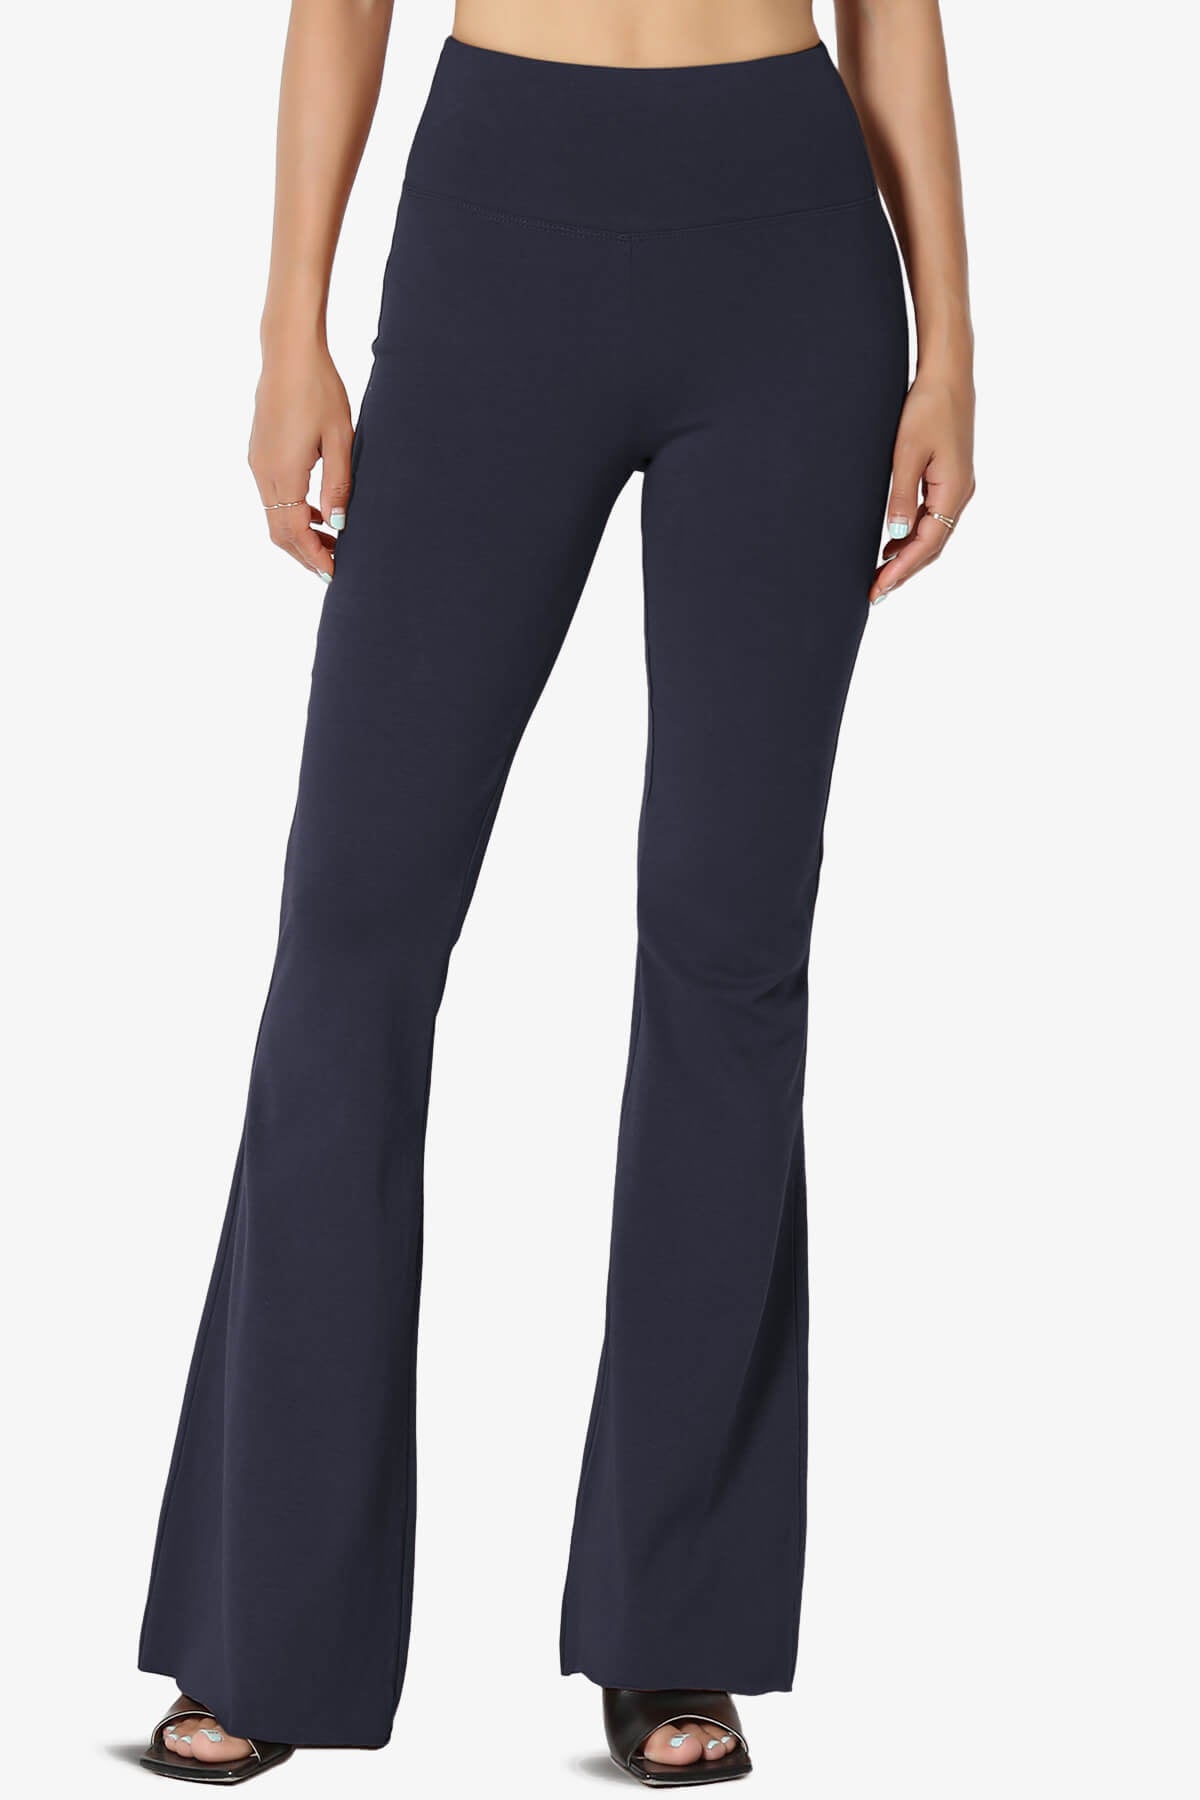 Load image into Gallery viewer, Zaylee Raw Hem Flared Comfy Yoga Pants NAVY_1
